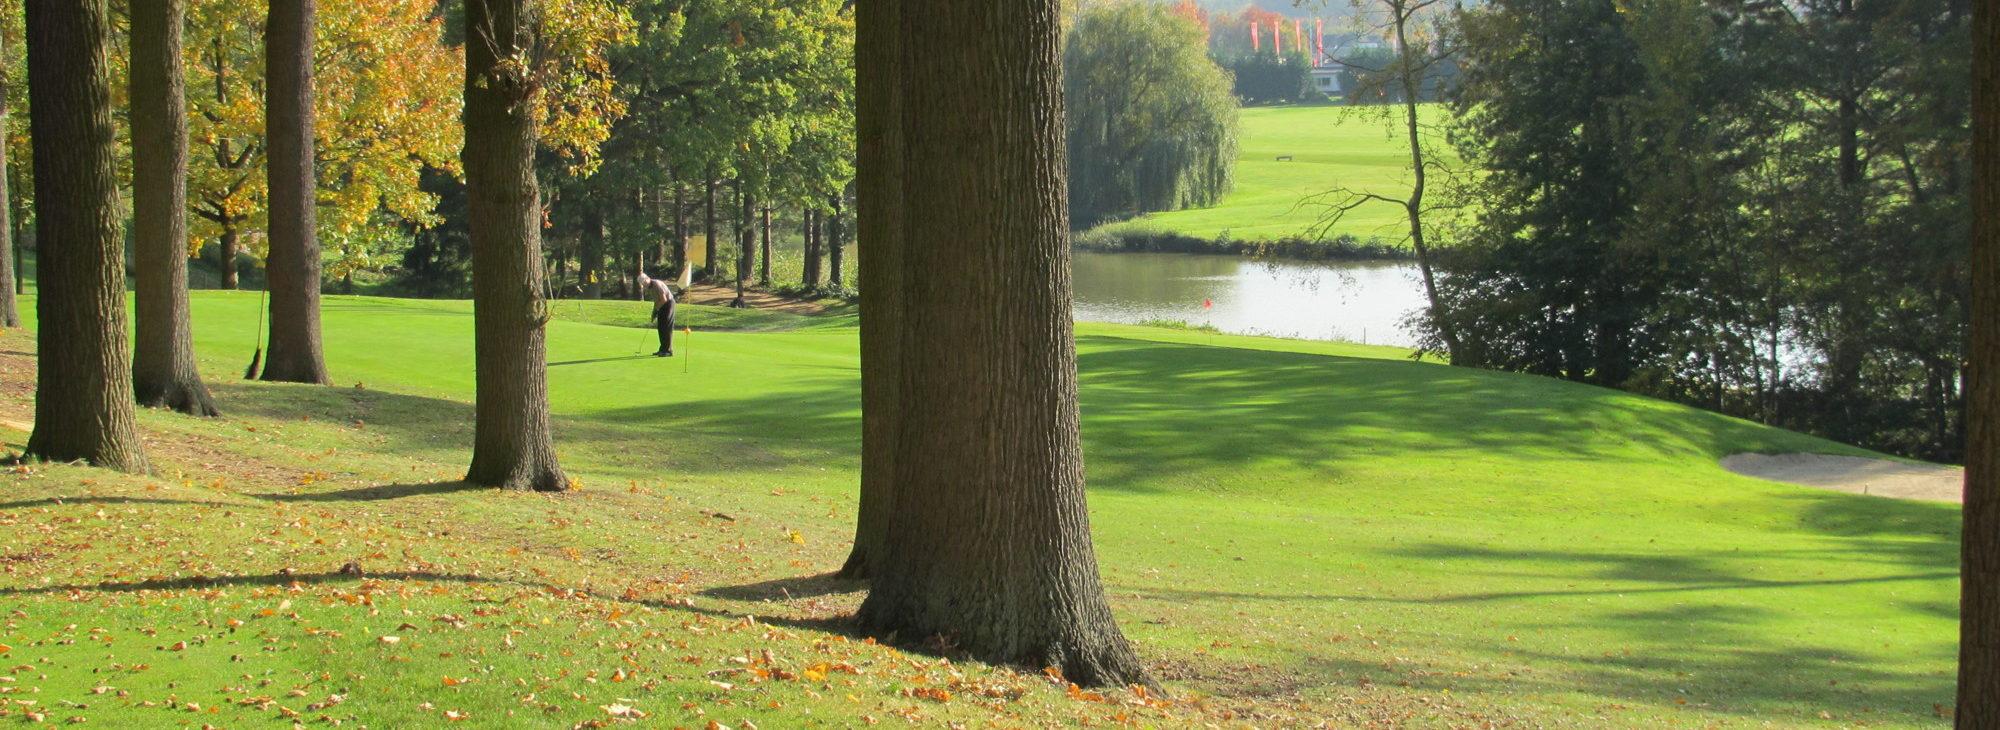 Winge Golf & Country Club has among the finest golf course in Brussels Waterloo & Mons